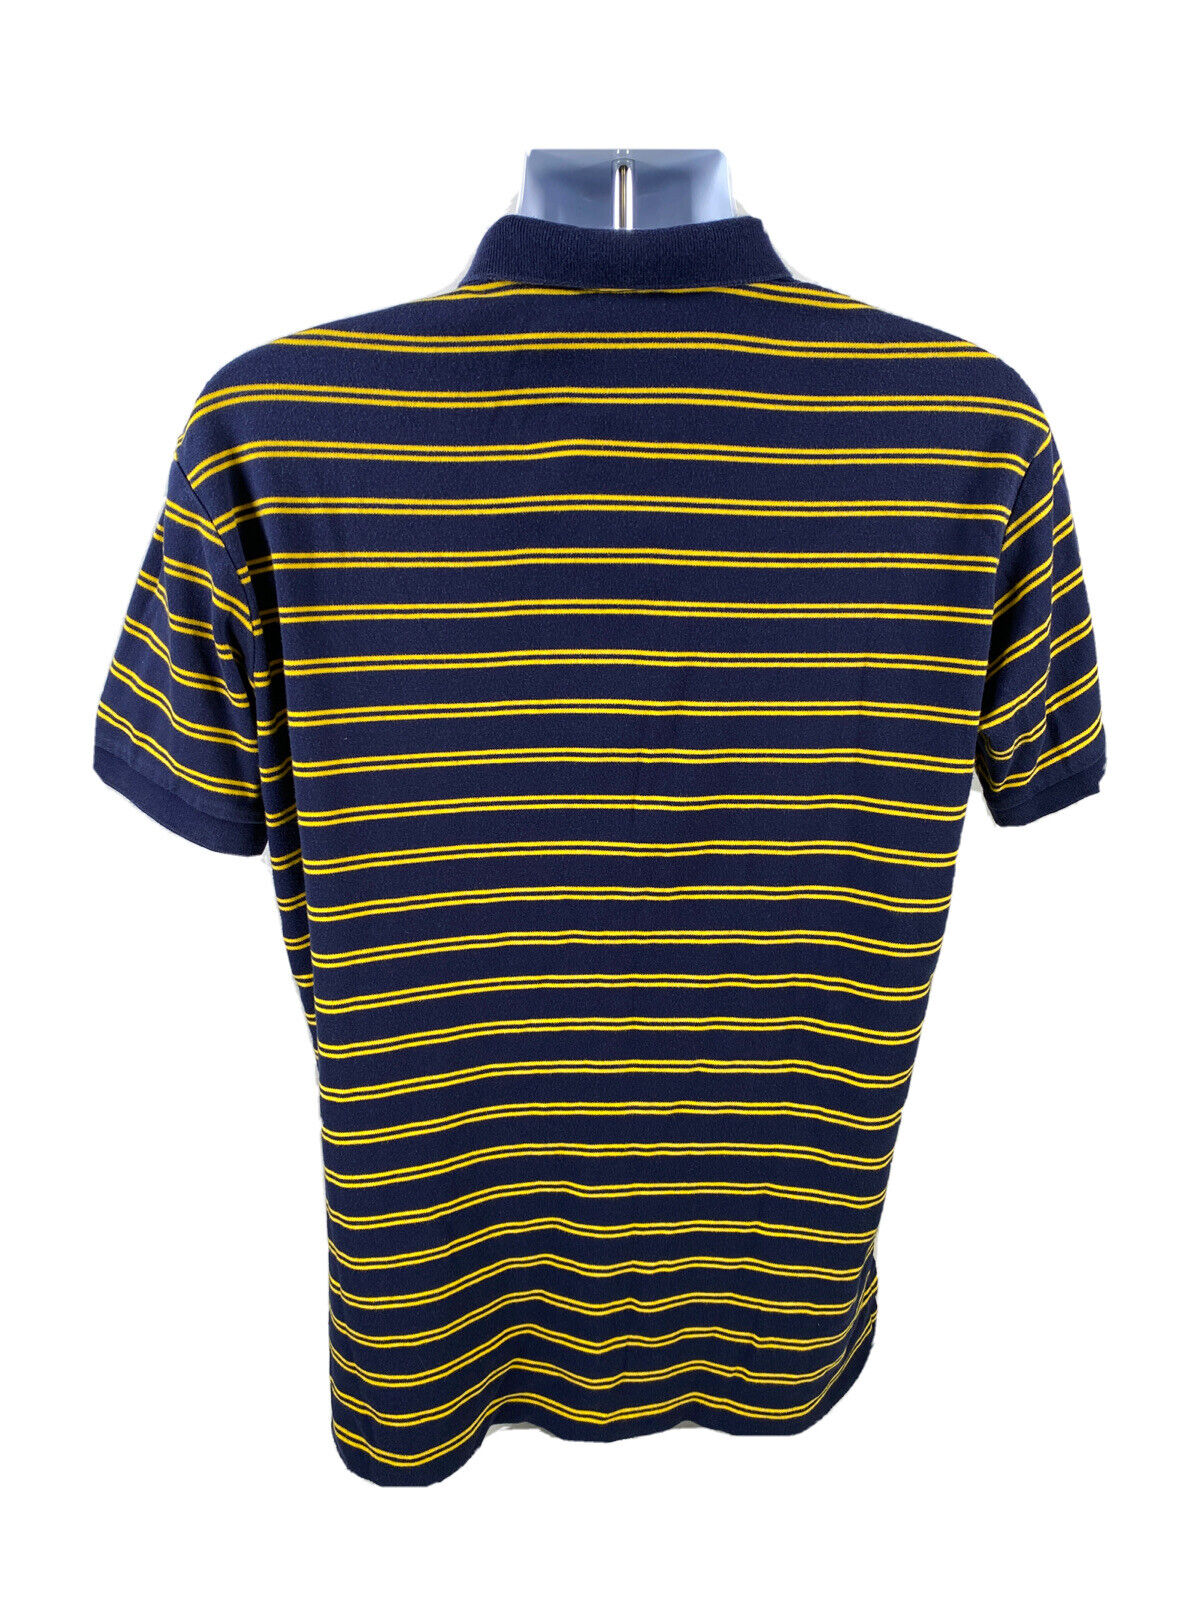 Polo by Ralph Lauren Men's Blue/Yellow Striped Short Sleeve Polo - M